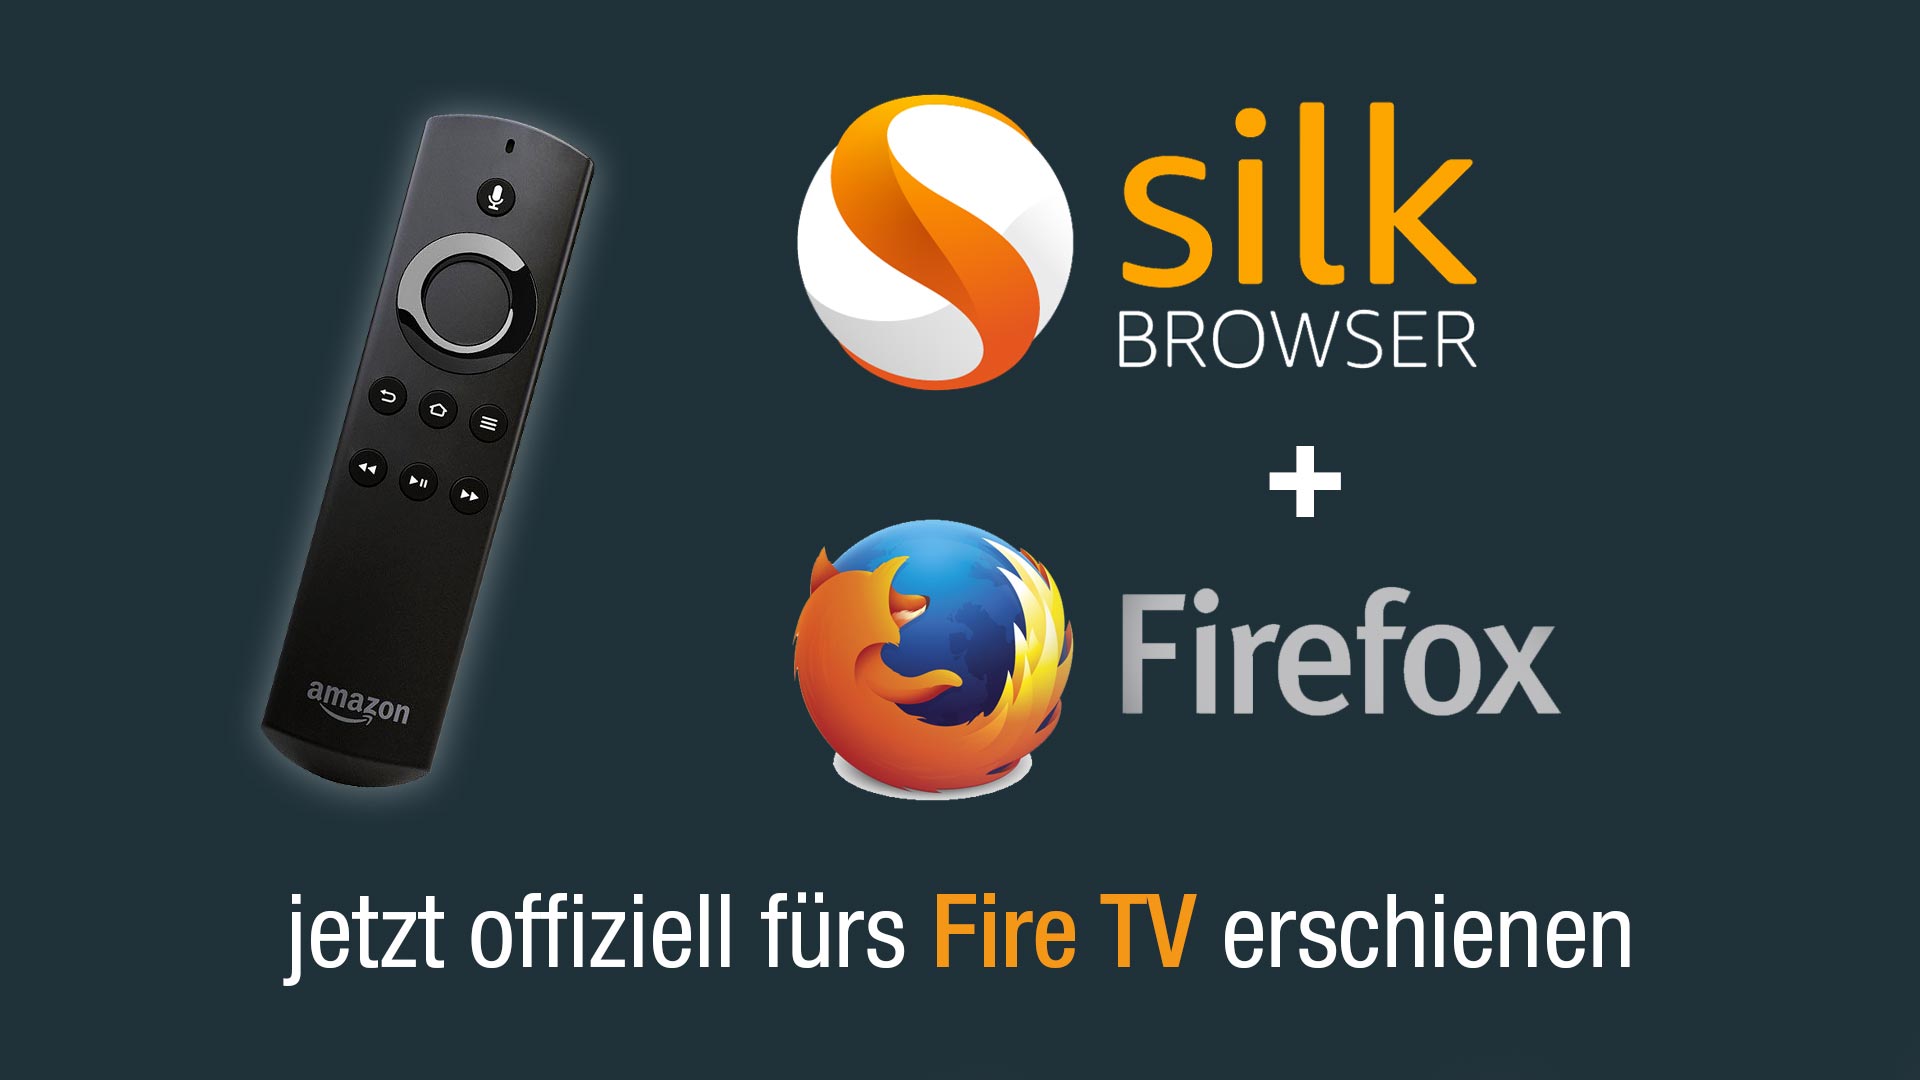 Firefox and Silk Web Browsers on the Fire TV